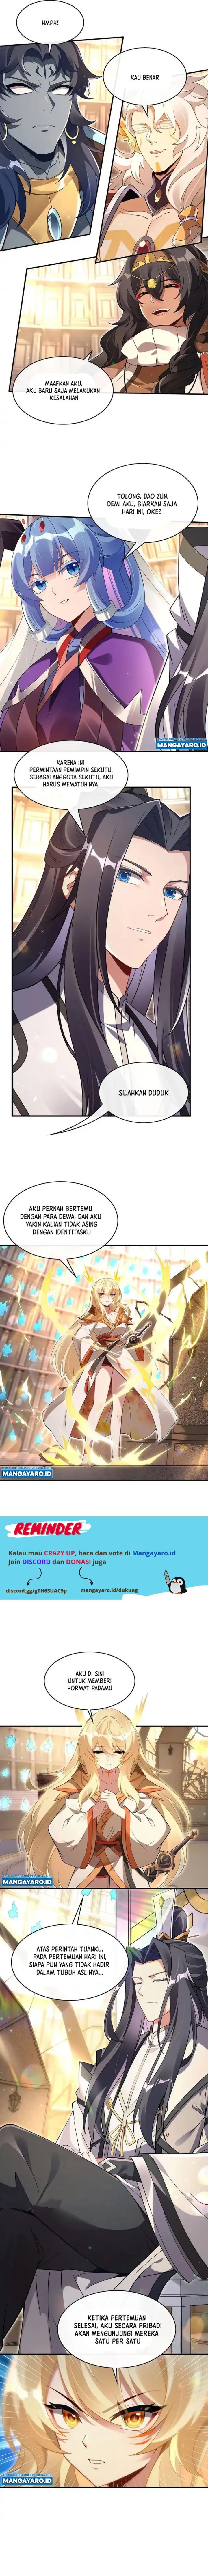 Dilarang COPAS - situs resmi www.mangacanblog.com - Komik my female apprentices are all big shots from the future 276 - chapter 276 277 Indonesia my female apprentices are all big shots from the future 276 - chapter 276 Terbaru 2|Baca Manga Komik Indonesia|Mangacan